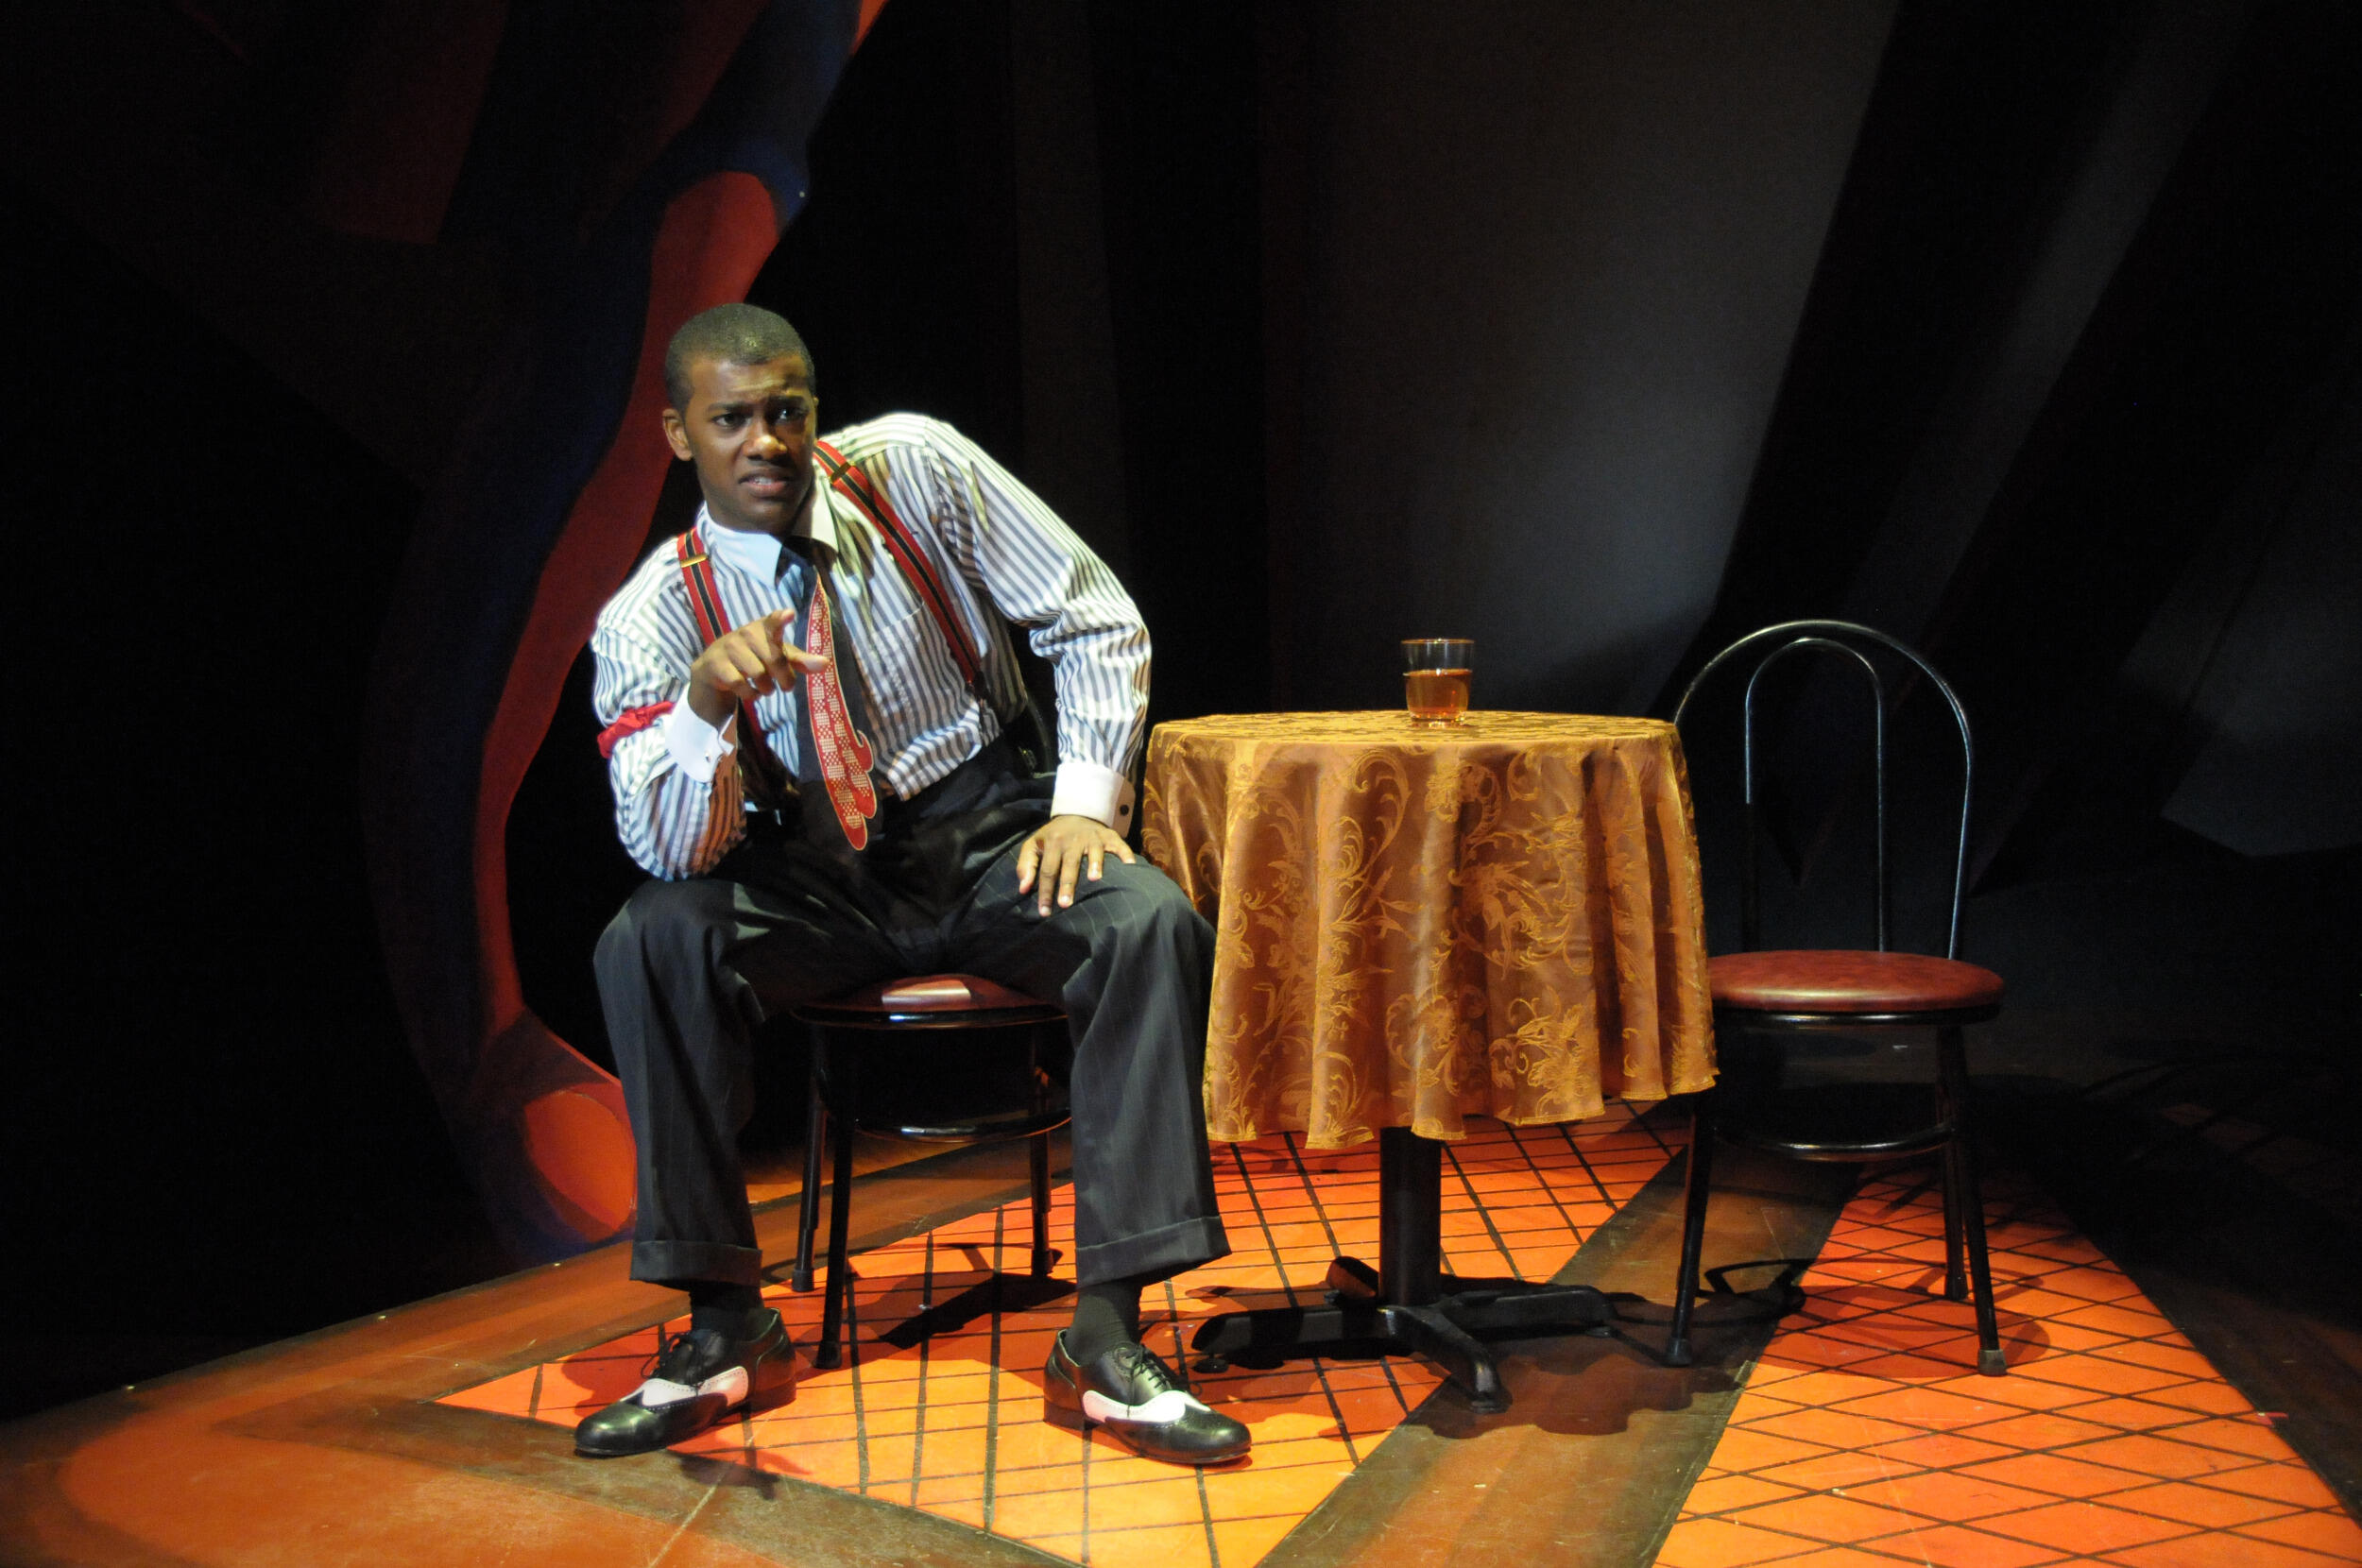 An actor on a stage, sits on a chair in the spotlight and speaks.